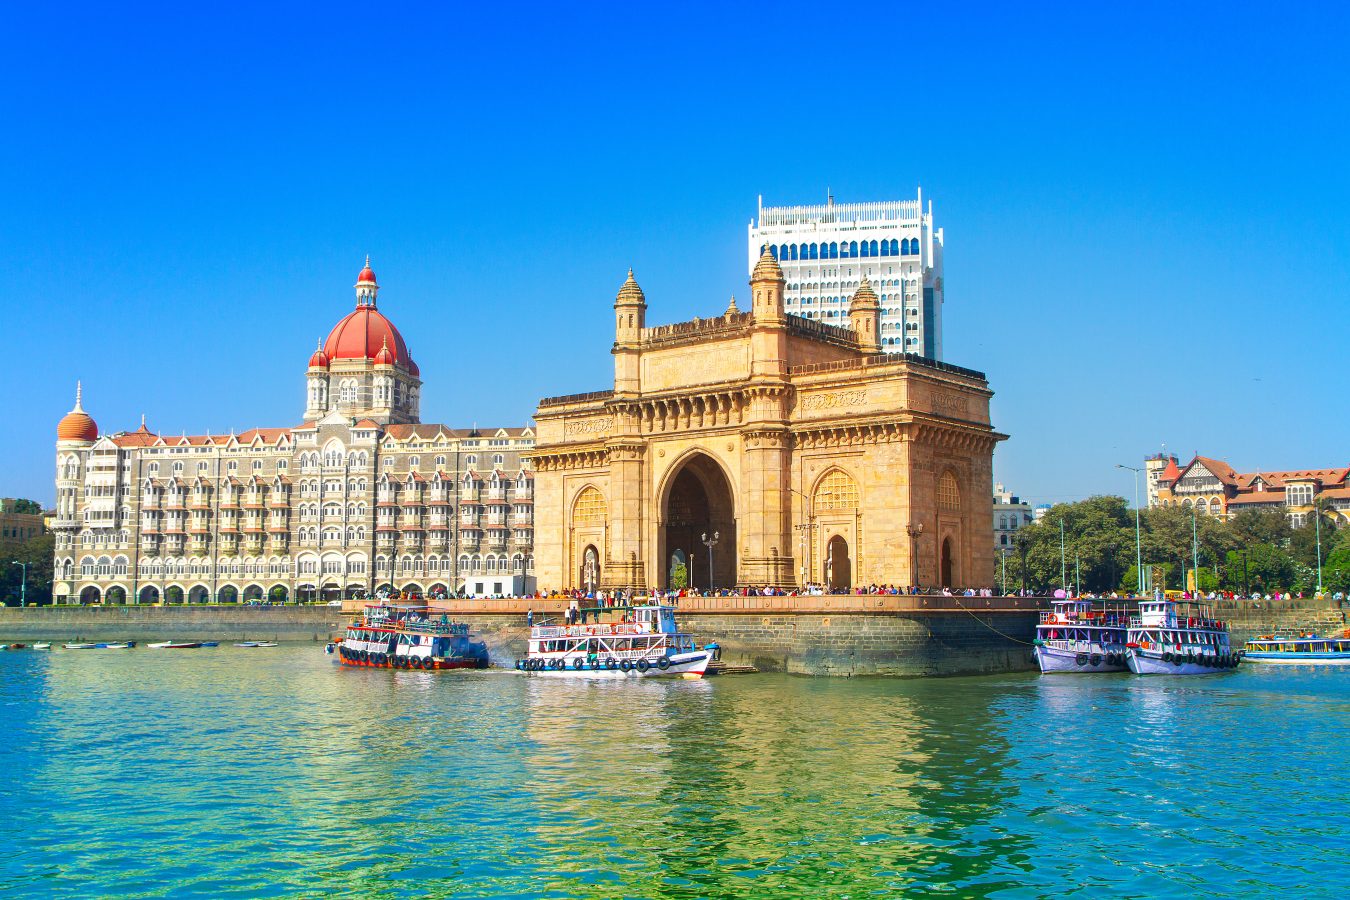 The Gateway of India and boats as seen from the Mumbai Harbour in India.